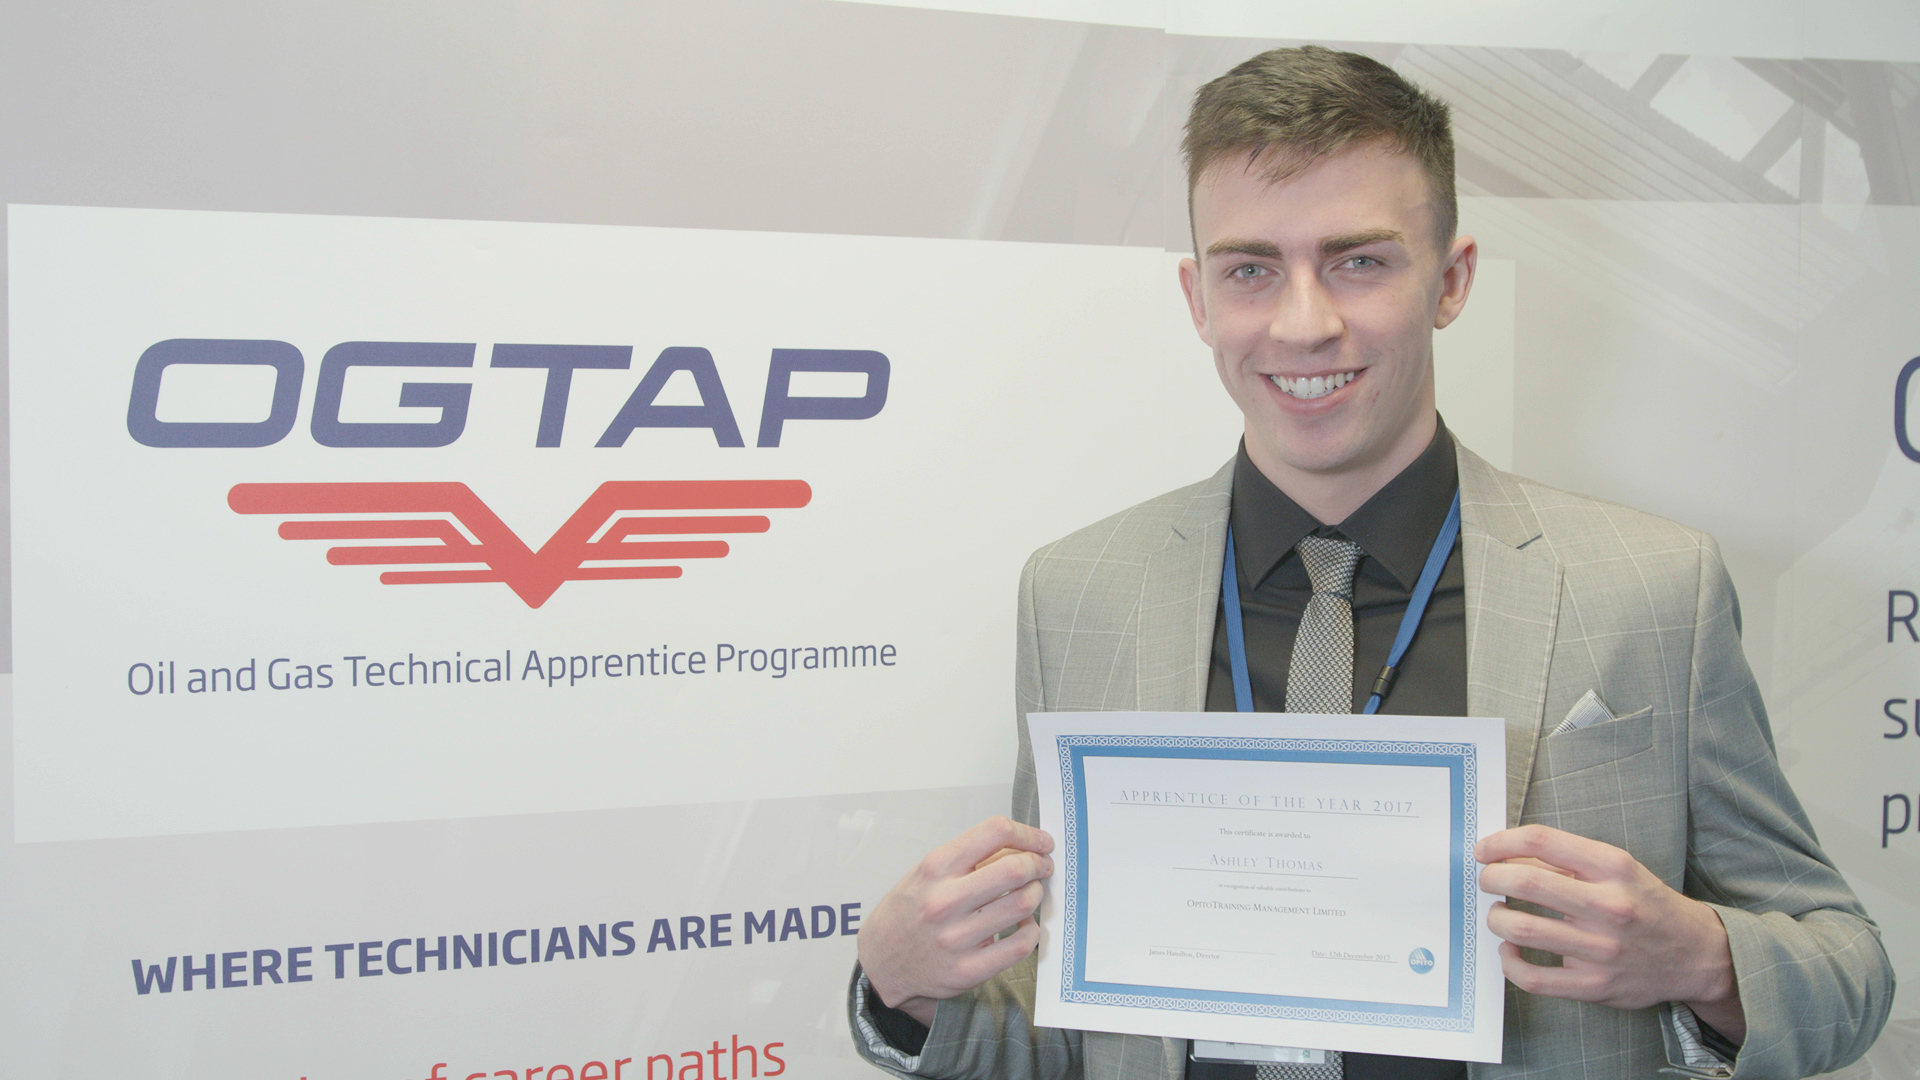 Opito's 2017 apprentice of the year, Ashley Thomas